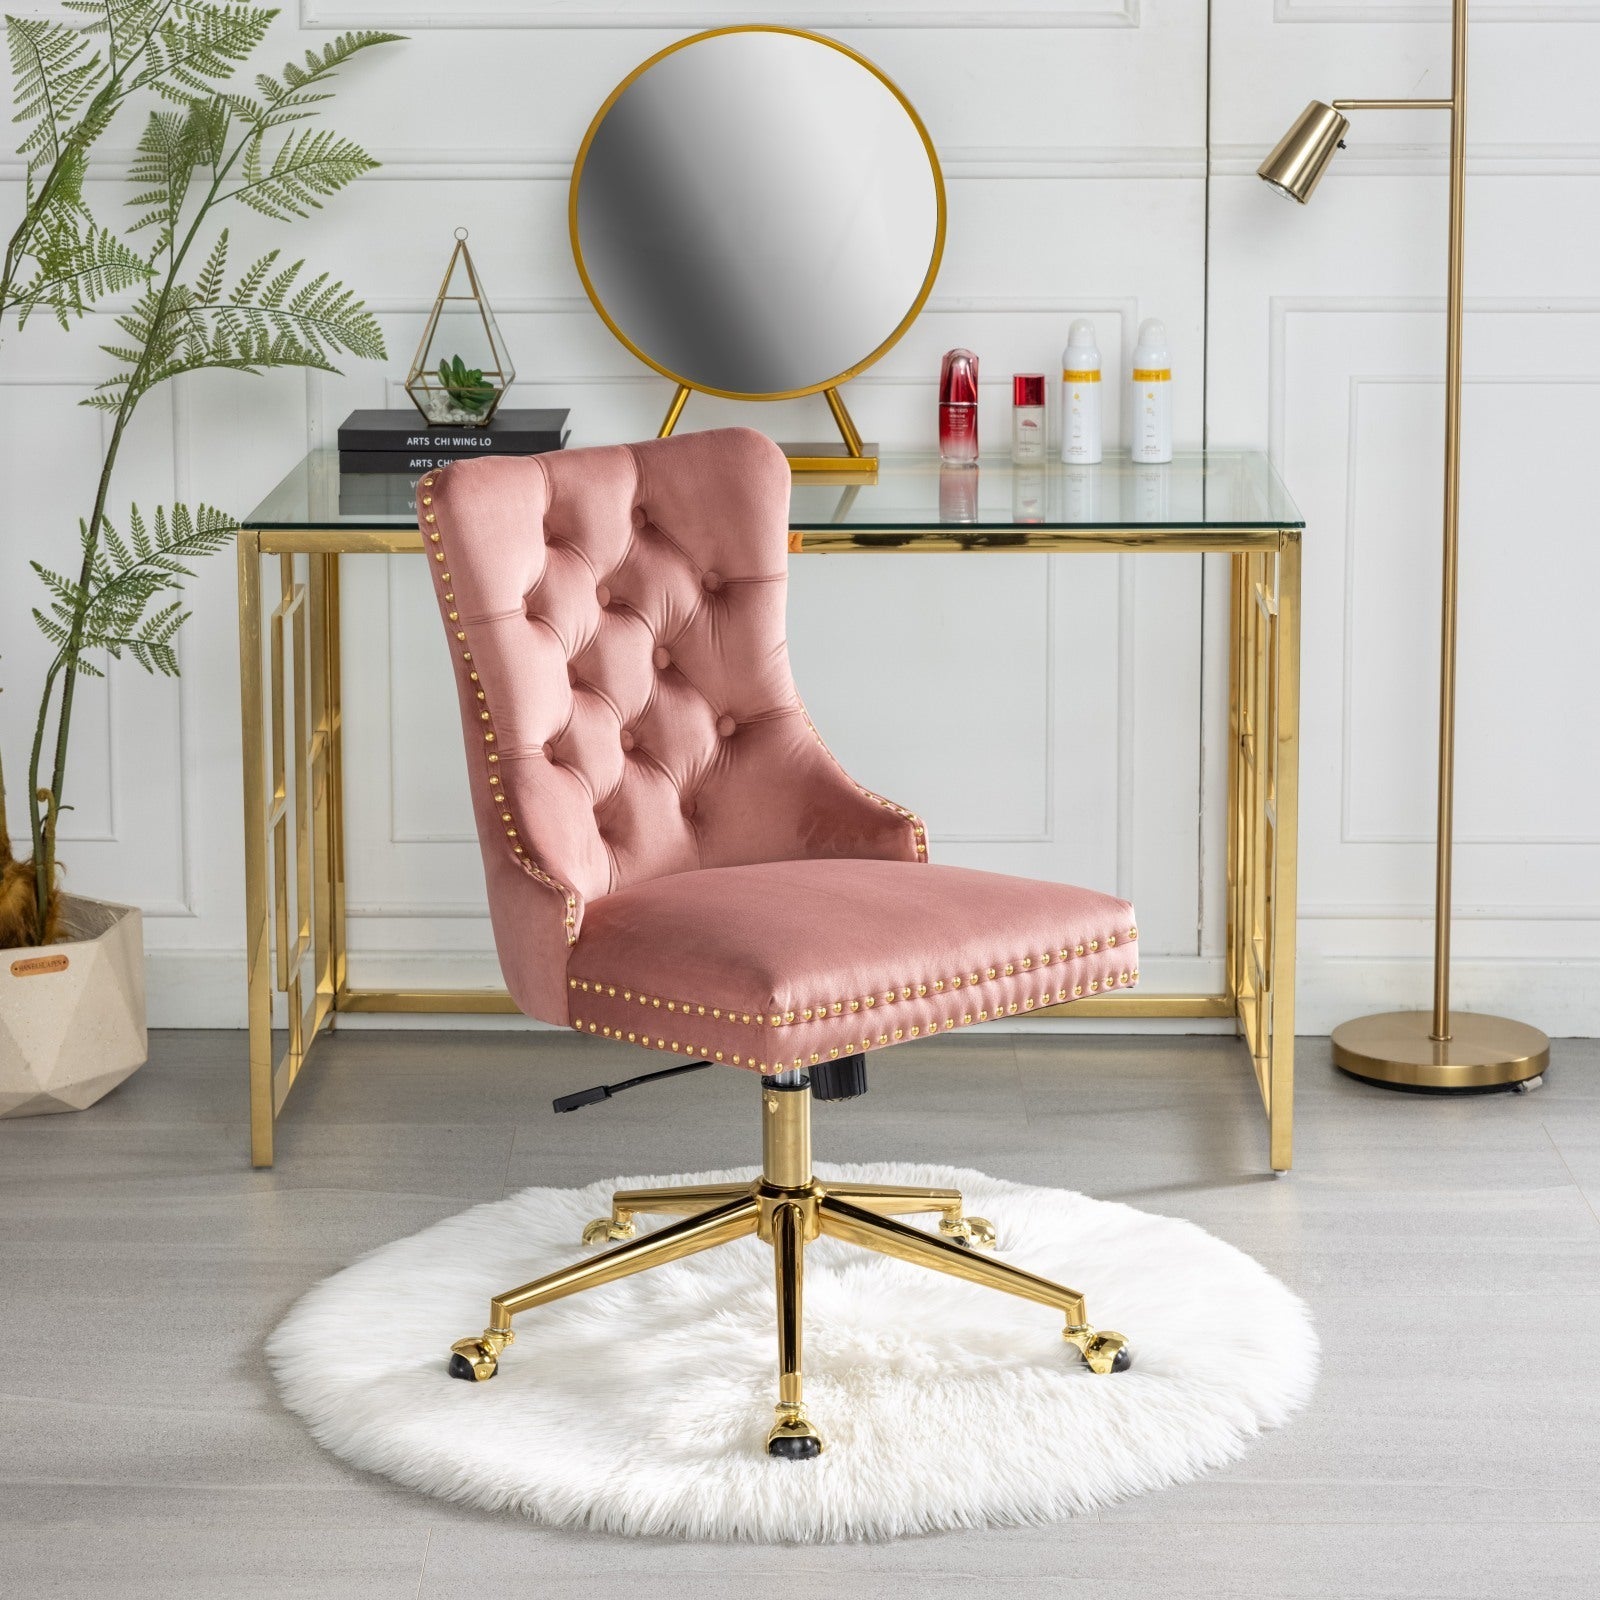 Velvet Upholstered Tufted Button Home Office Chair with Golden Metal Base, Adjustable Desk Chair Swivel Office Chair - Pink